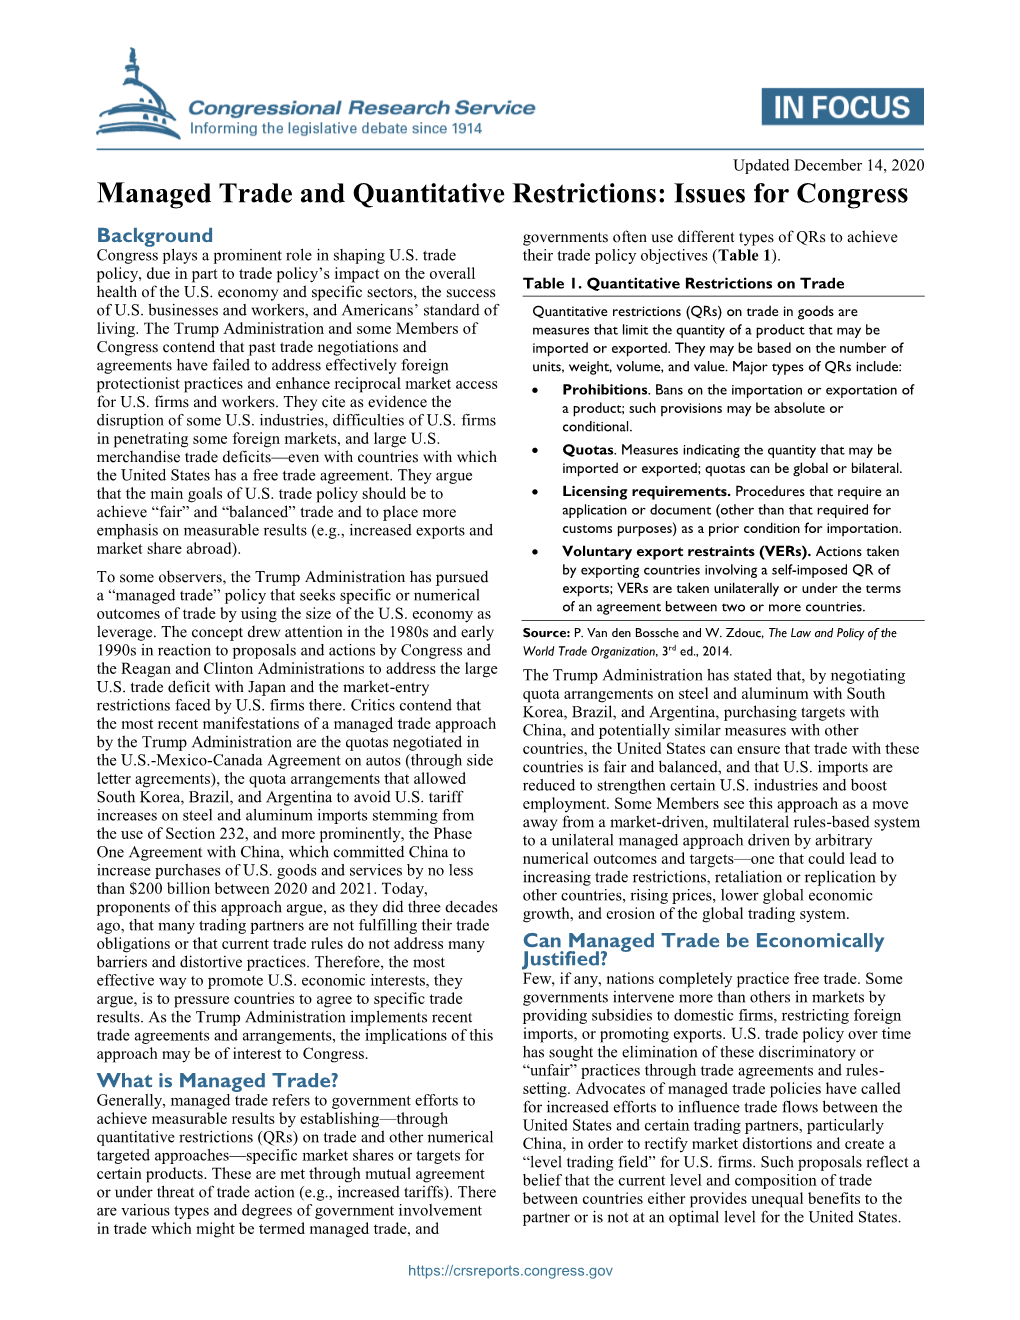 Managed Trade and Quantitative Restrictions: Issues for Congress